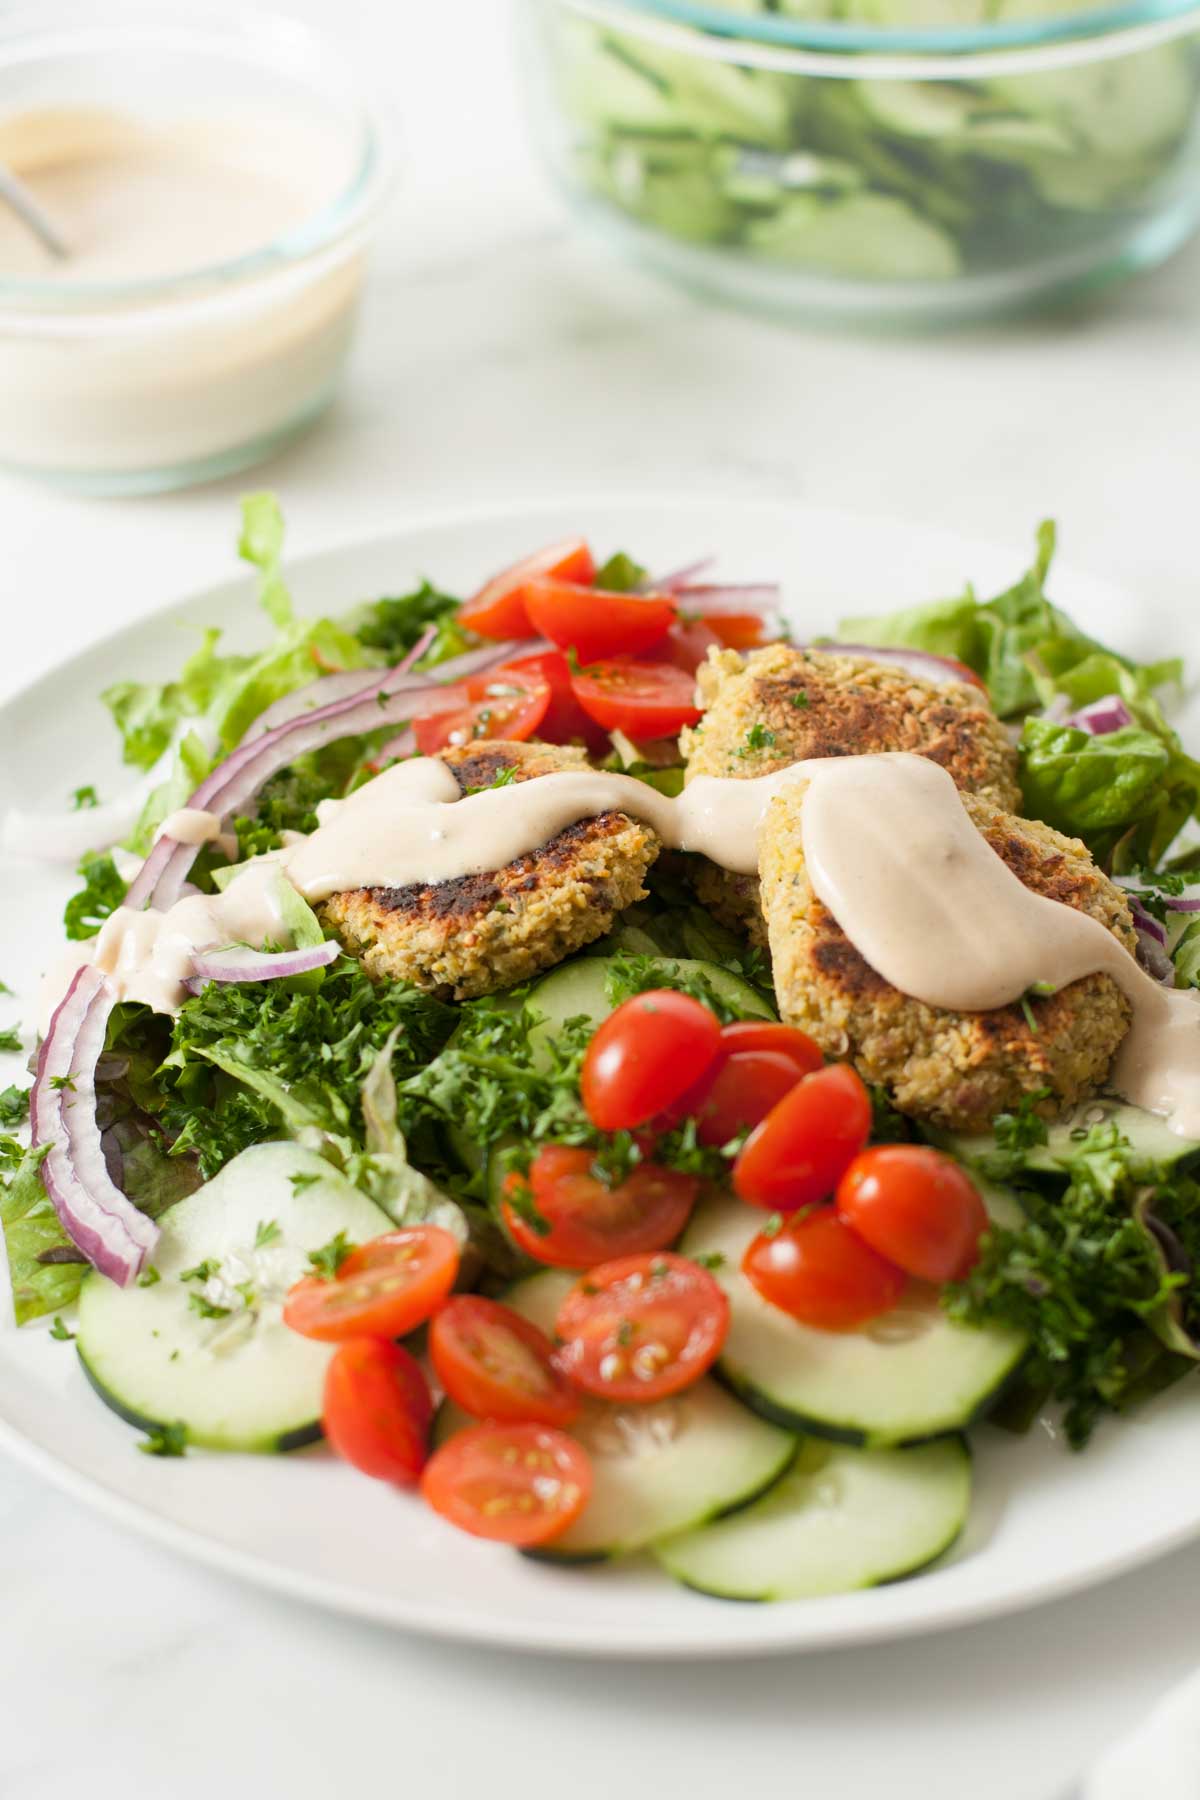 Falafel salad with tahini dressing finished dish served on white plate